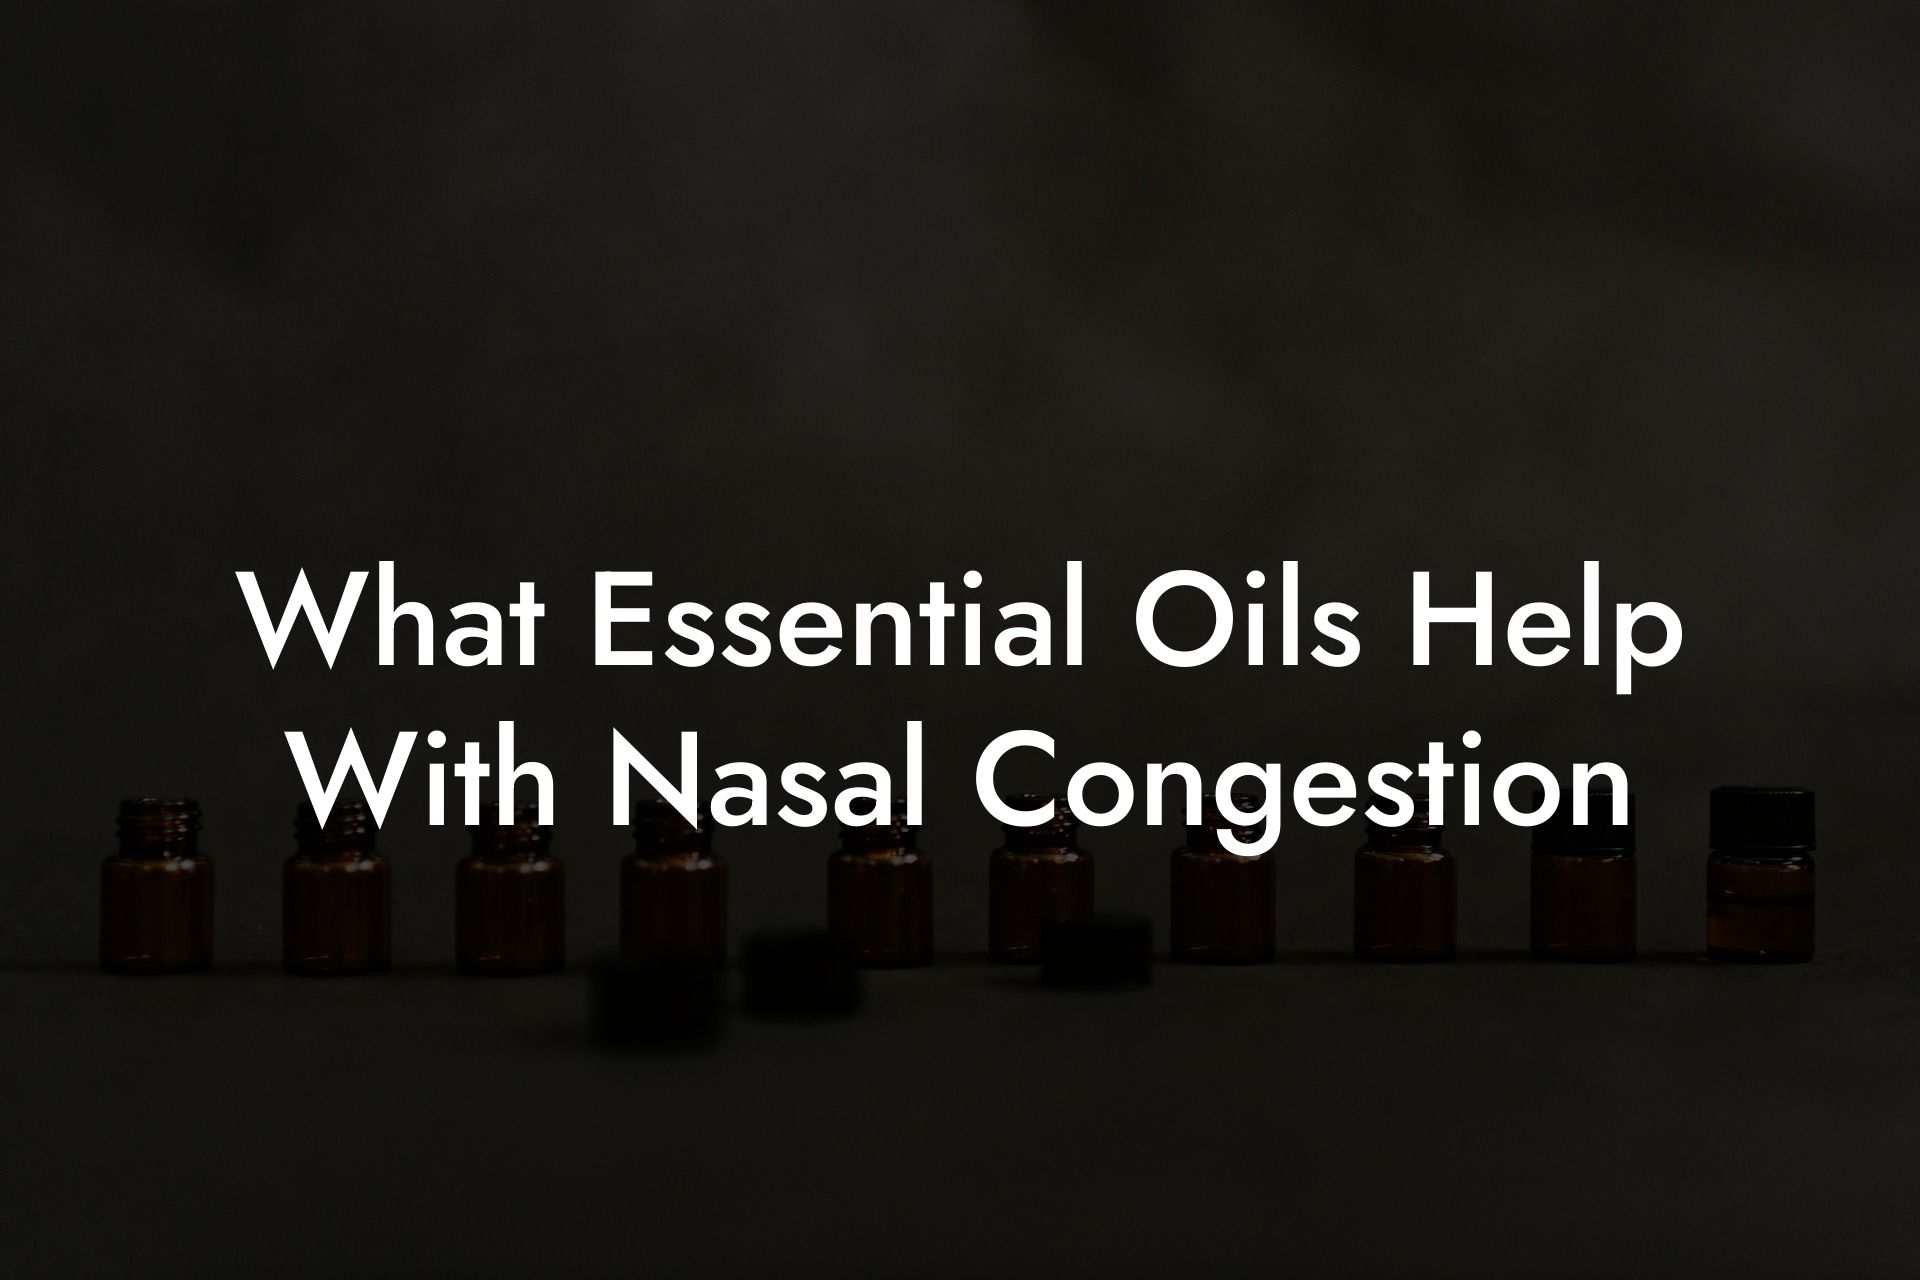 What Essential Oils Help With Nasal Congestion